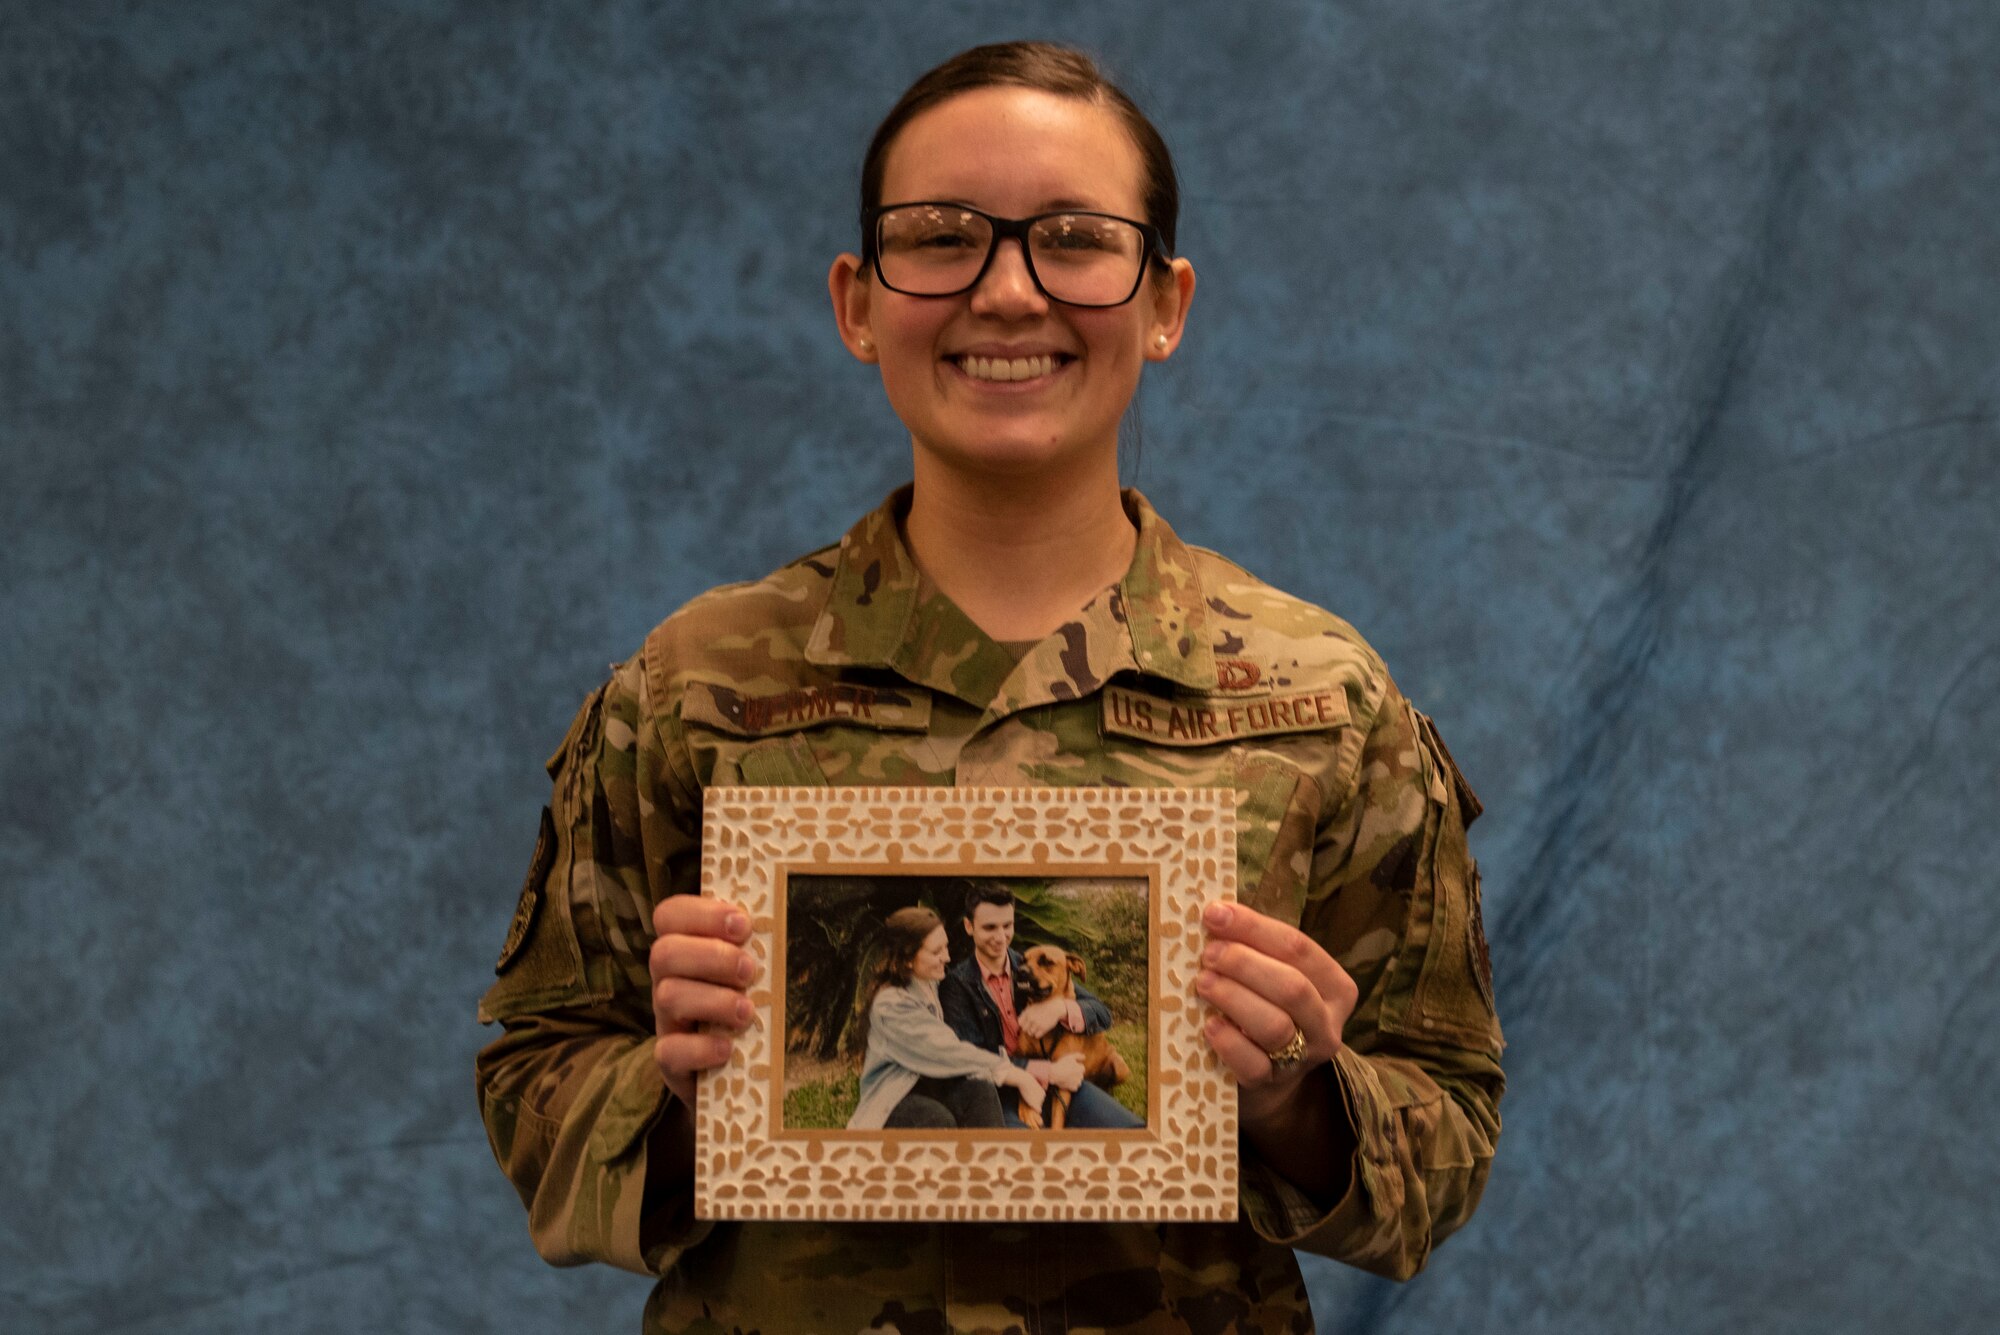 Airman 1st Class Abby Werner 47th Operations Support Squadron air traffic controller, poses with a photo of her and her husband and dog, at Laughlin Air Force Base, Texas, Jan. 13, 2021. Abby and her husband are both serving and are stationed at Laughlin. (U.S. Air Force photo by Airman 1st Class David Phaff)